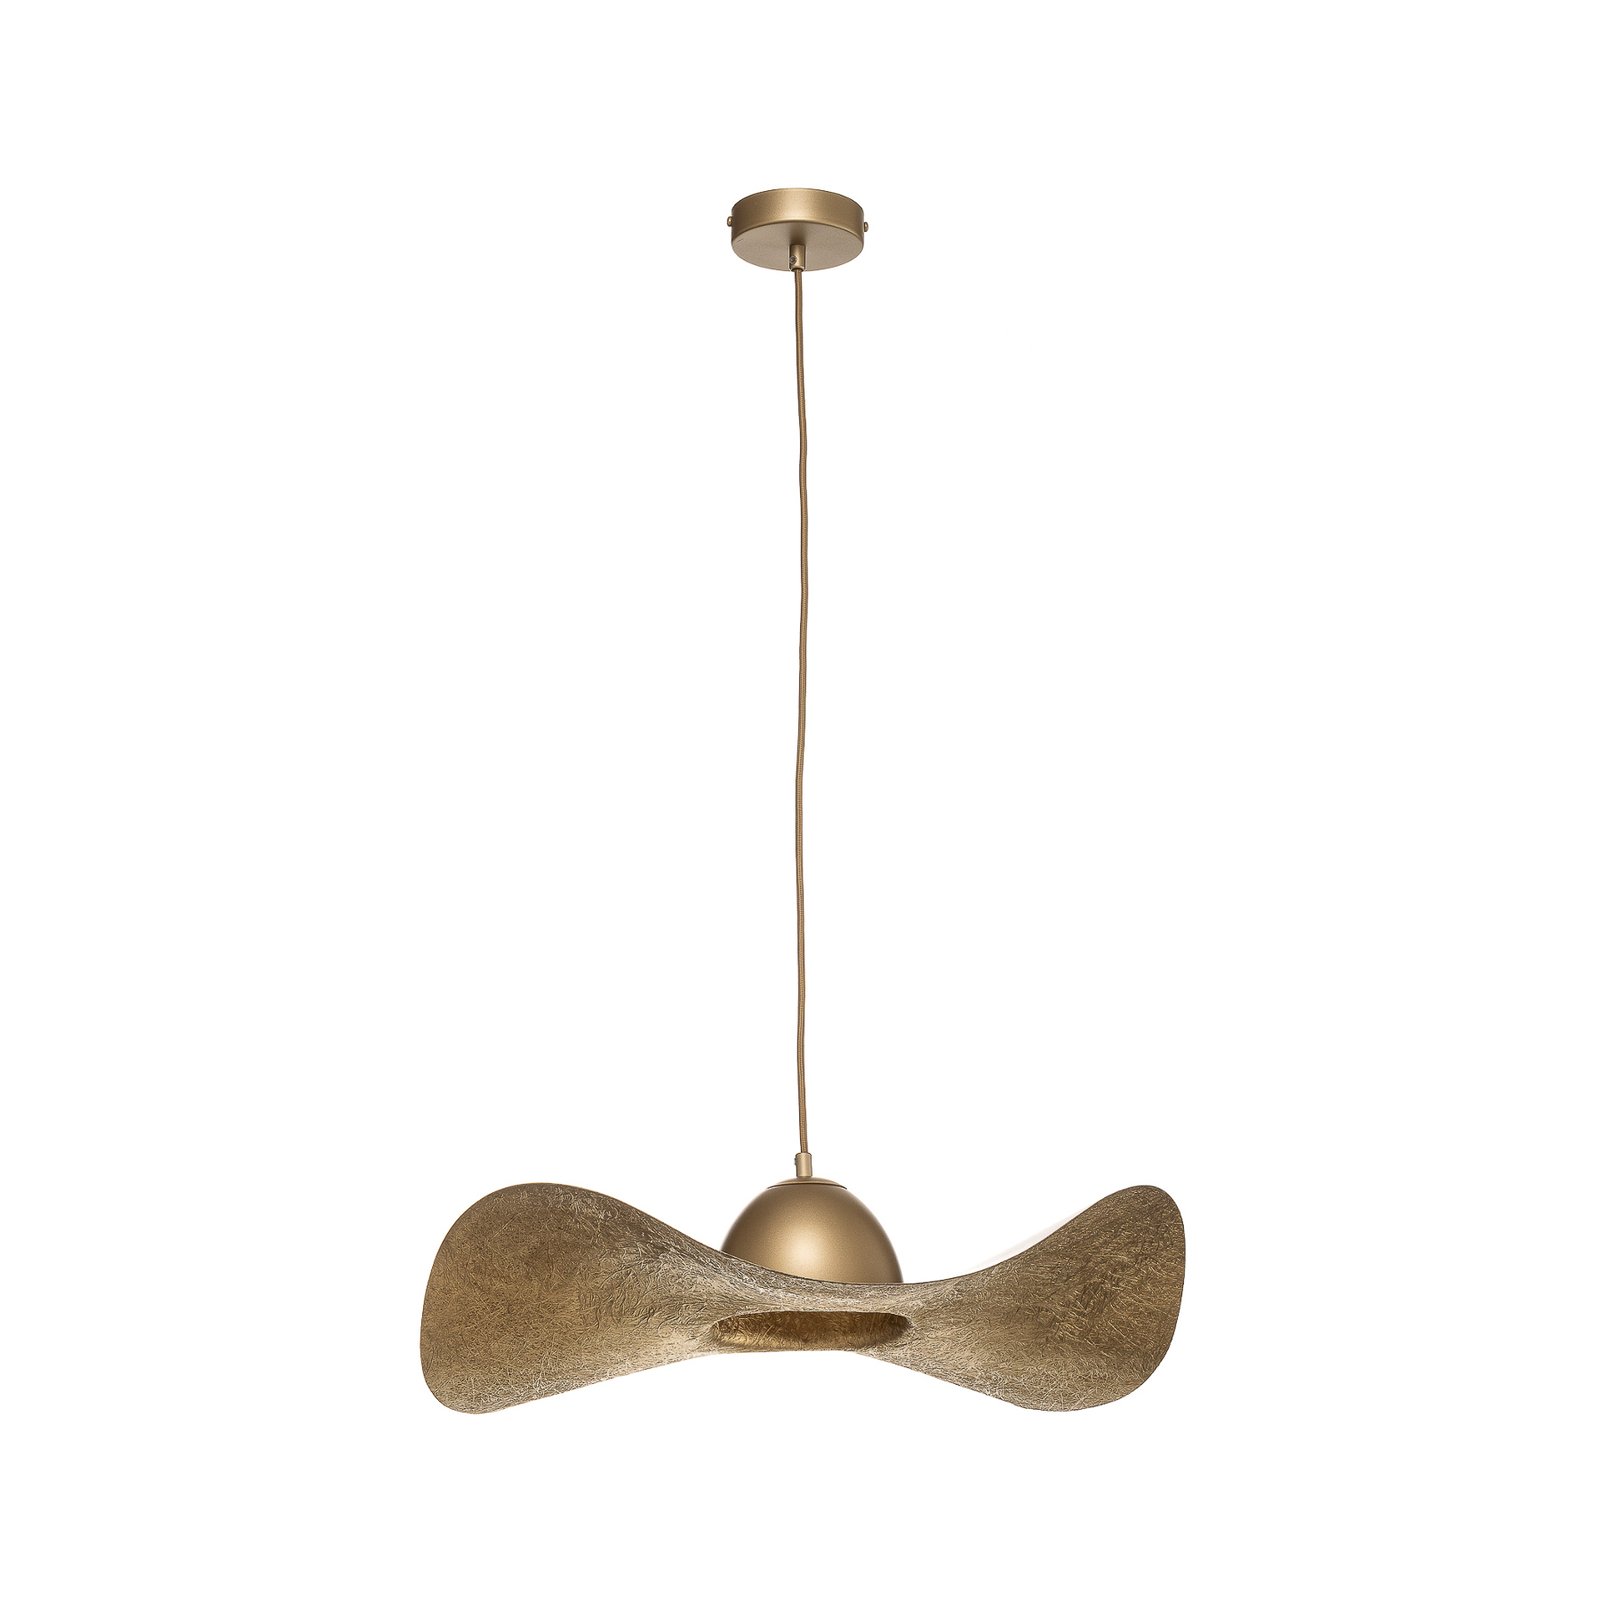 Jil pendant light, curved lampshade, gold